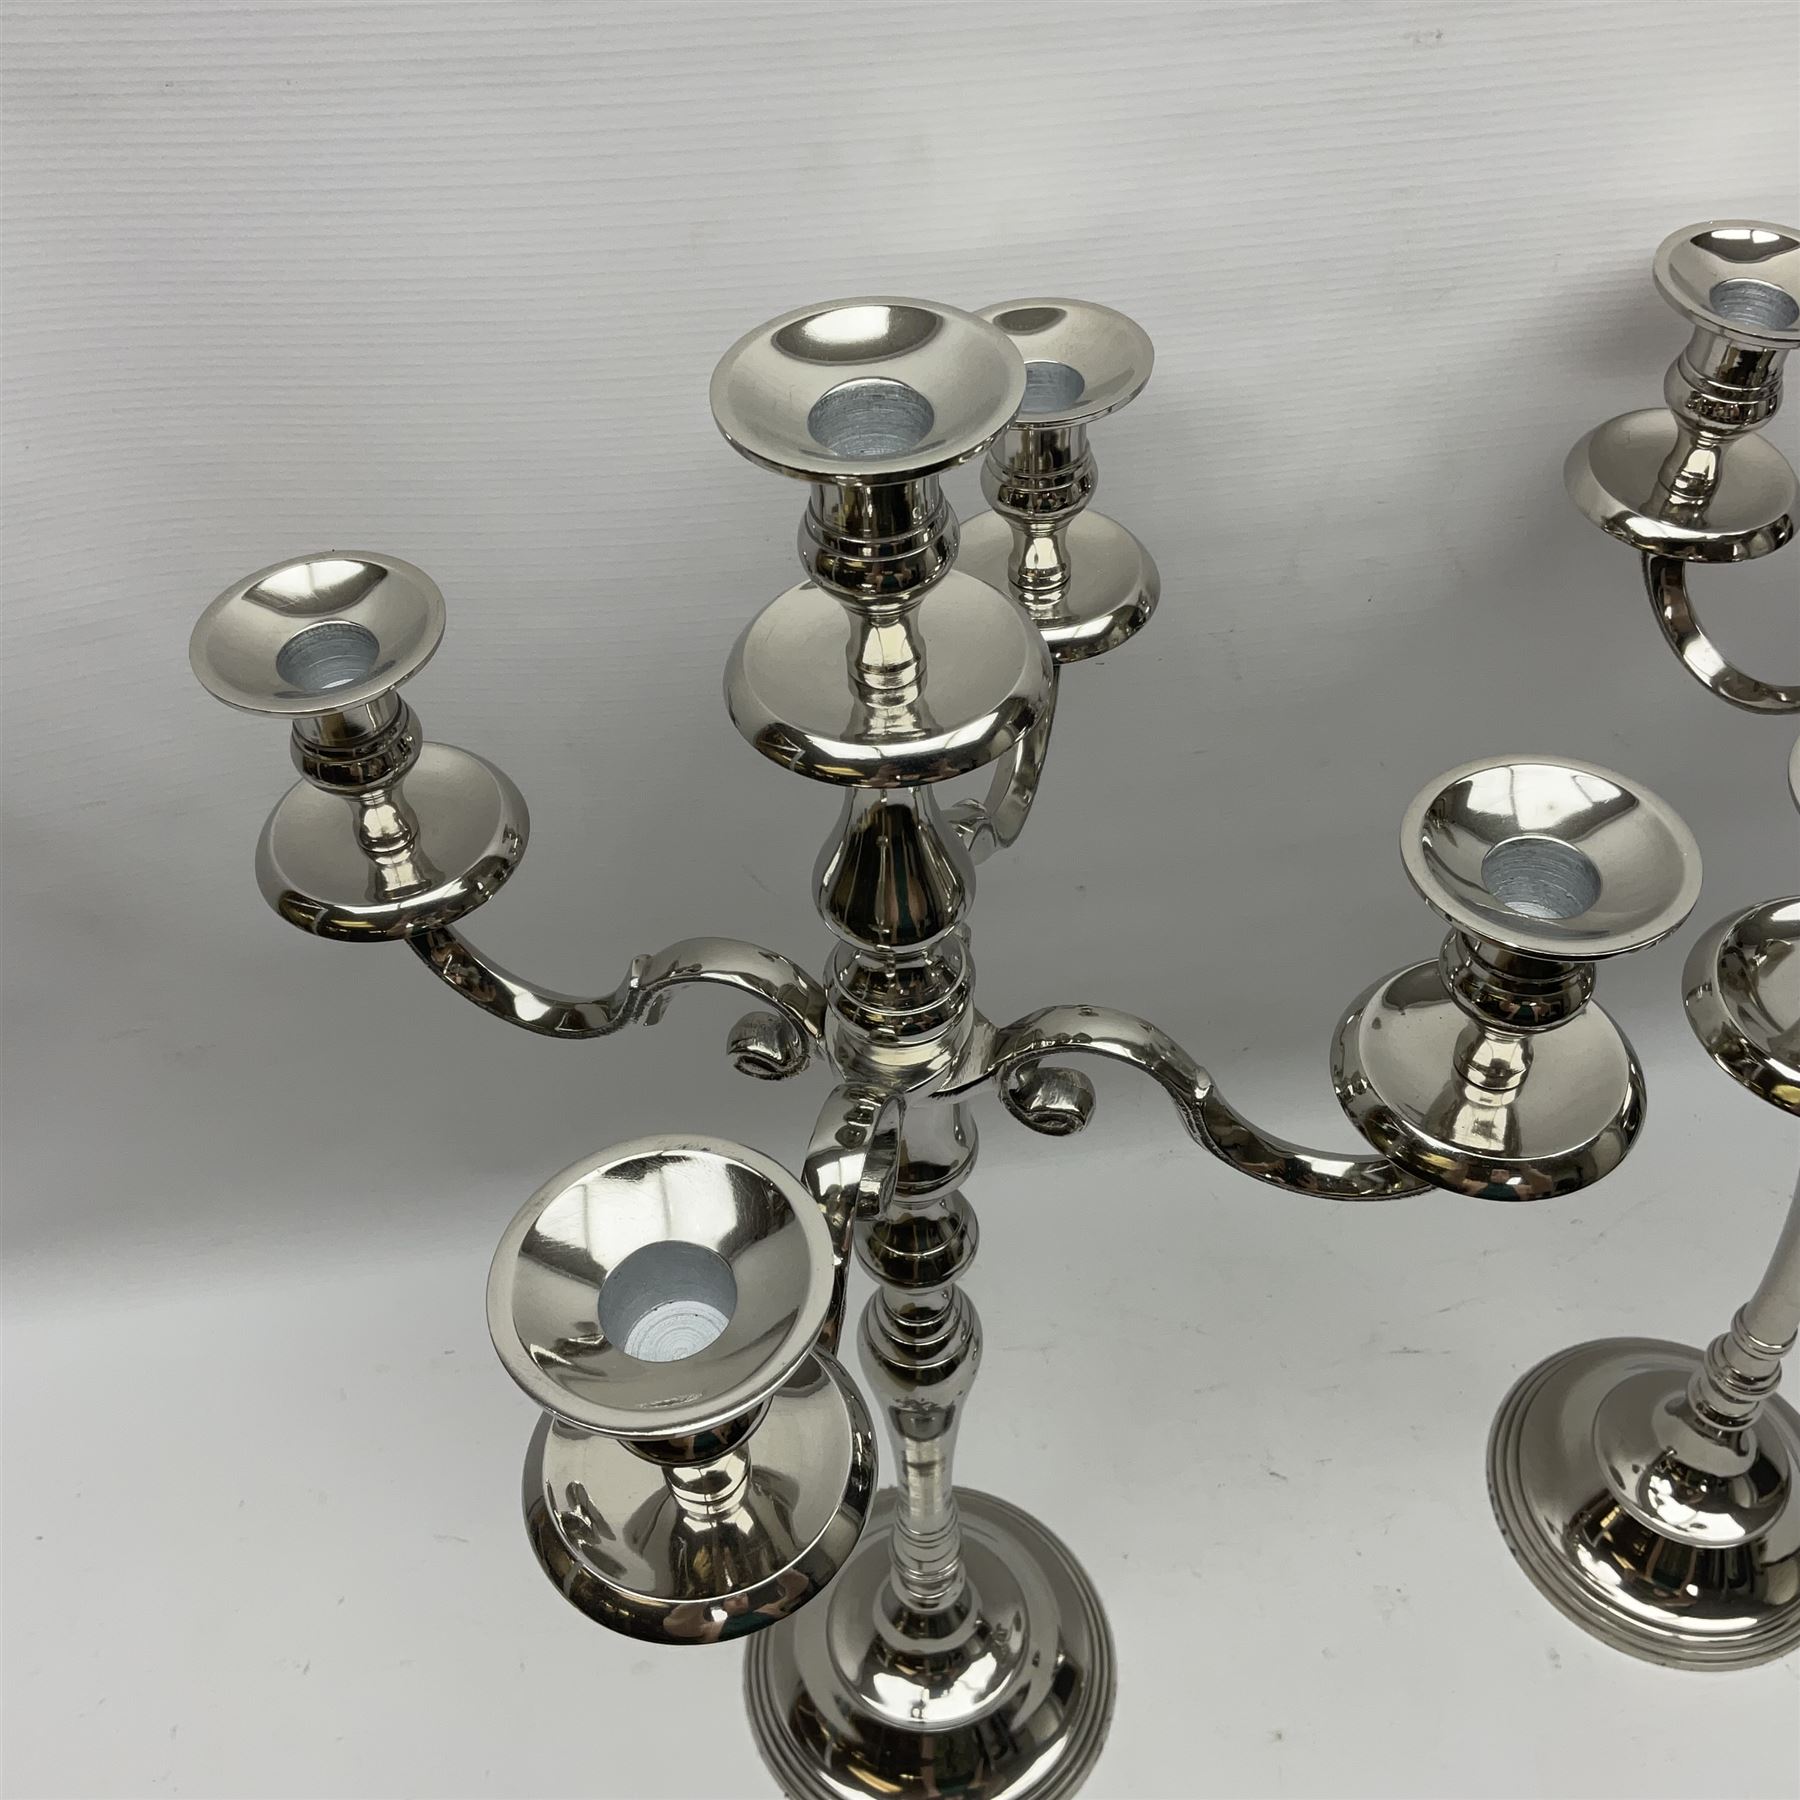 Pair of four branch candelabras - Image 2 of 7